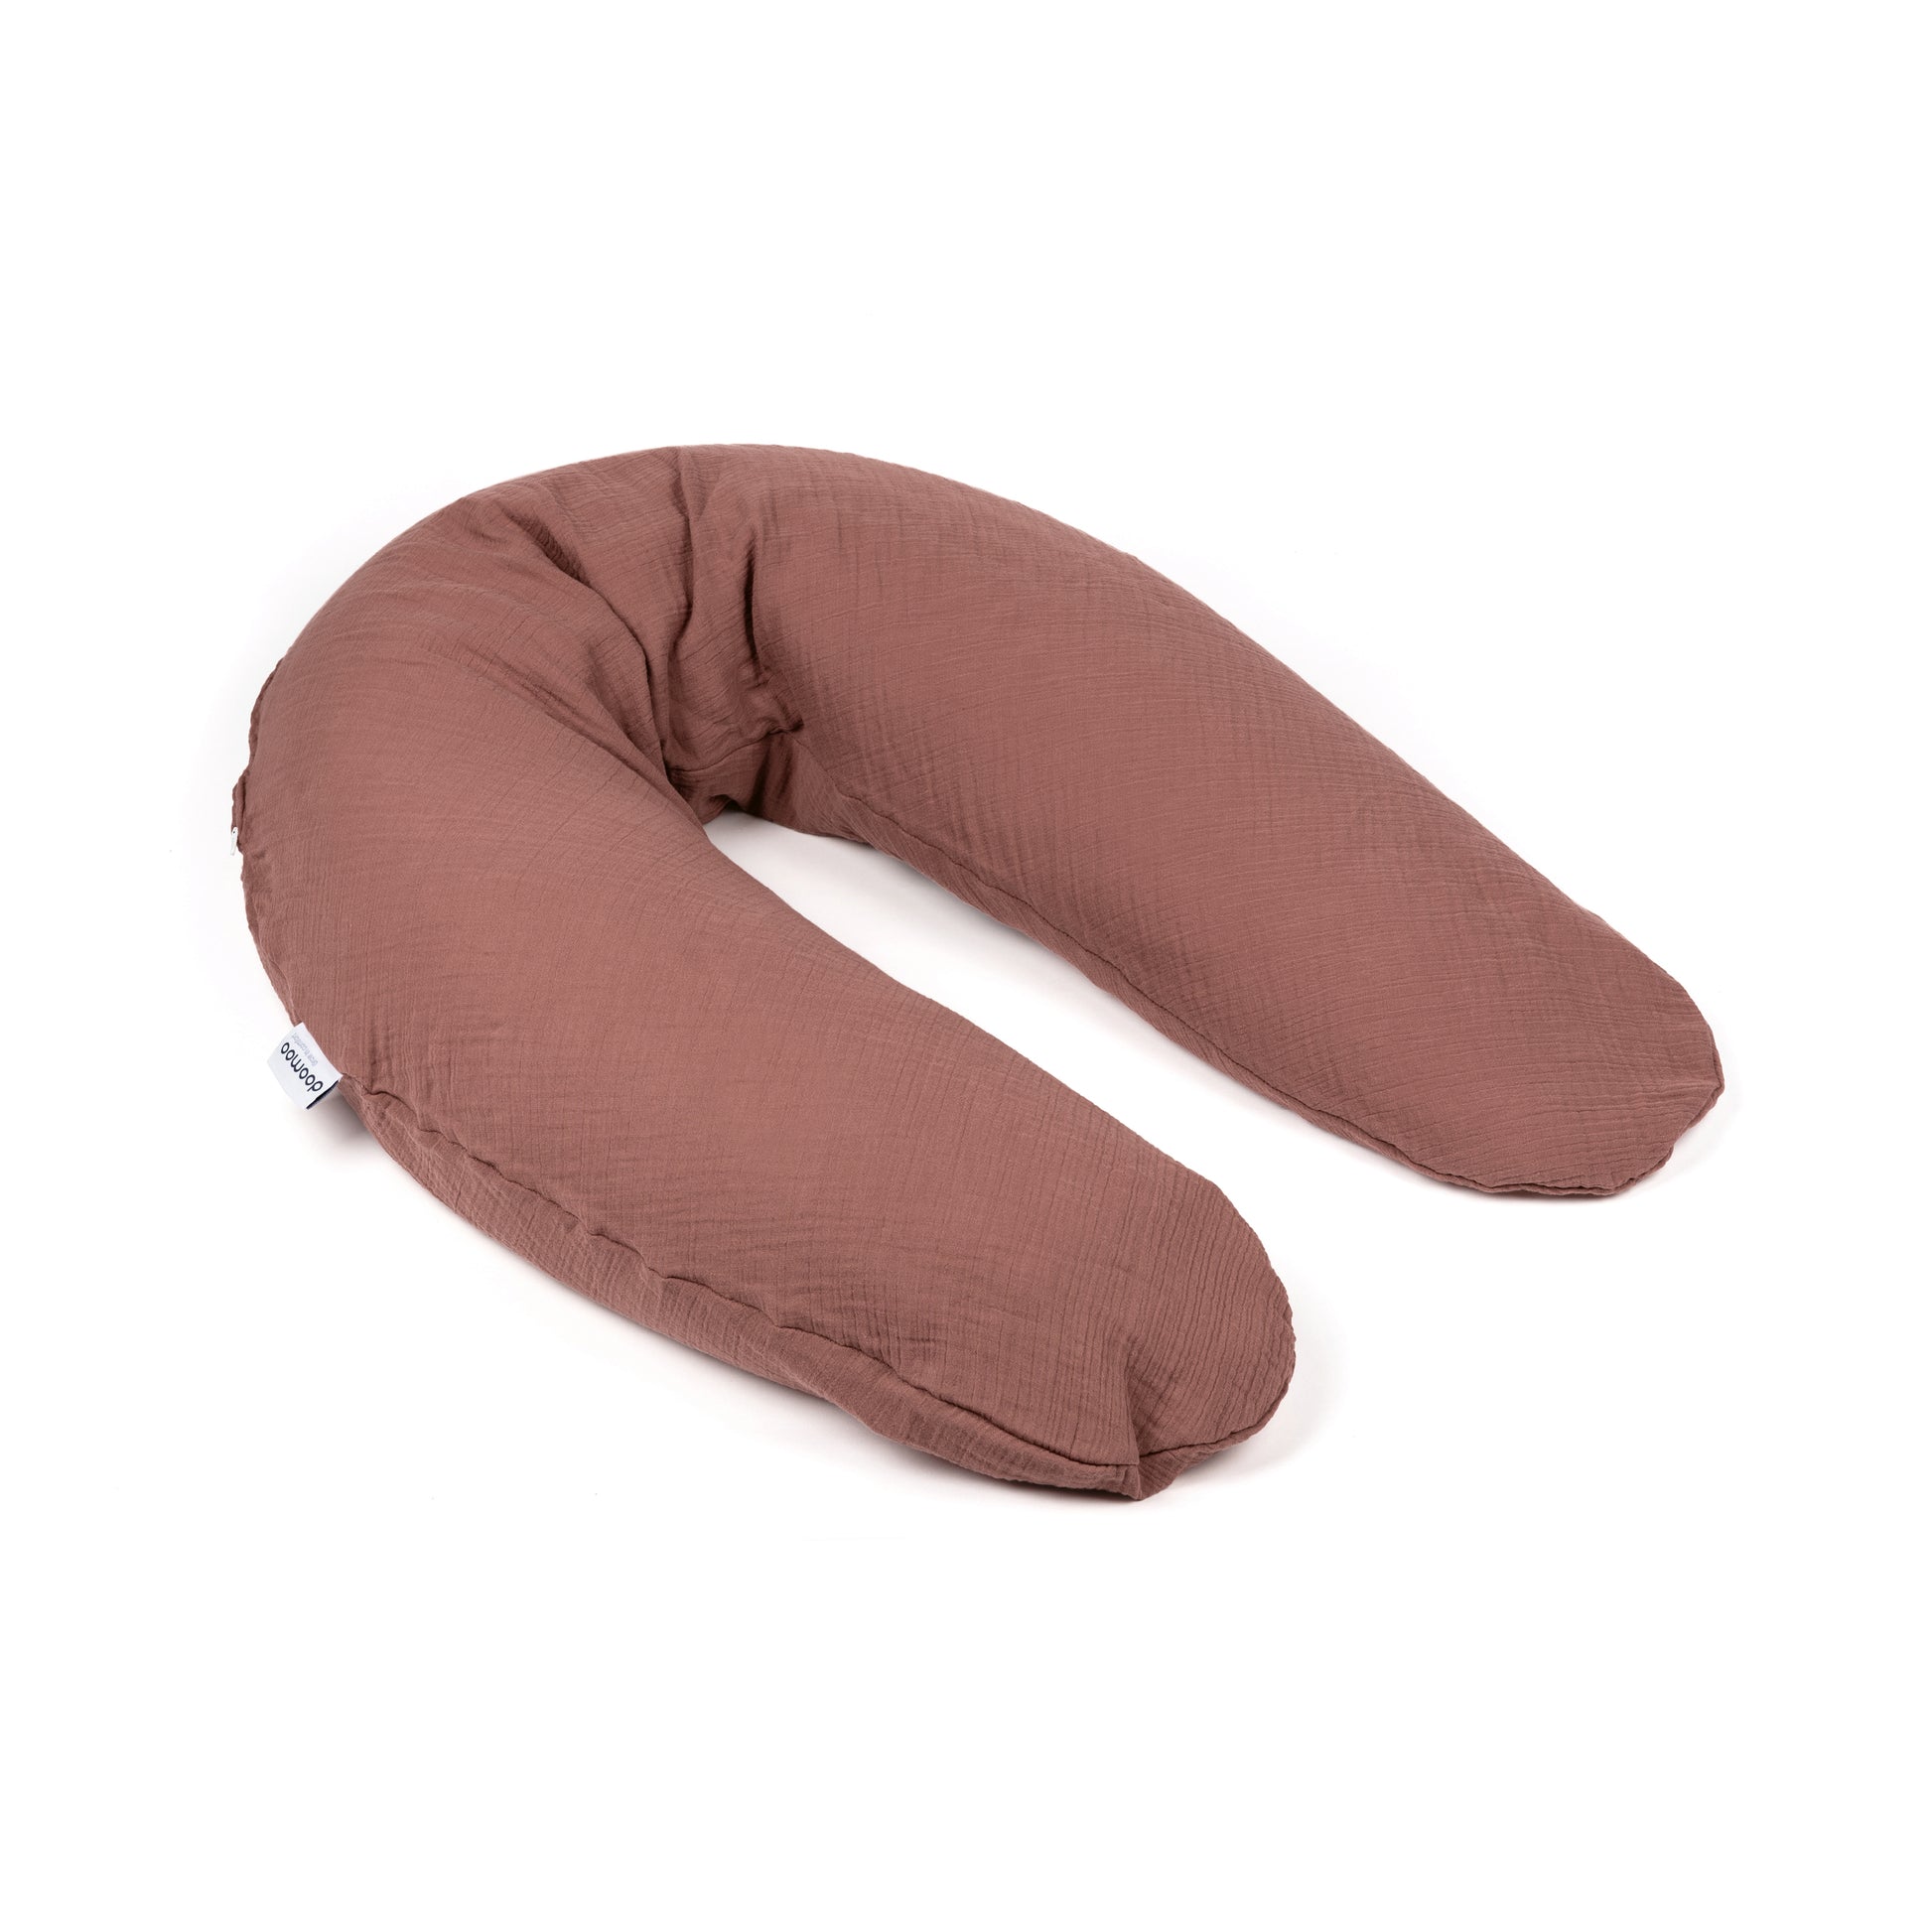 Large Brick pregnancy and breastfeeding pillow